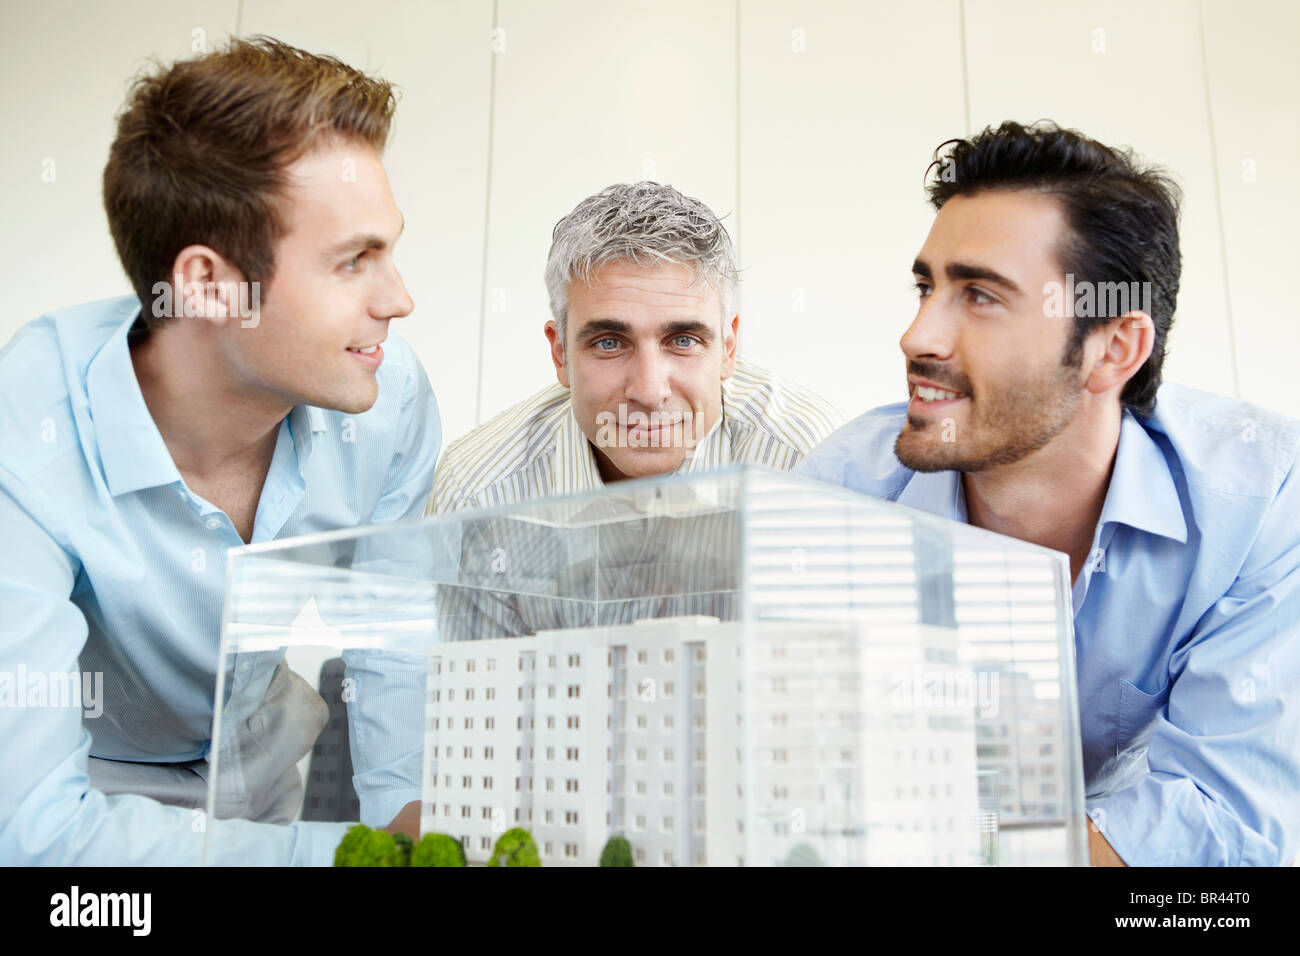 3 men discussing architectural model Stock Photo